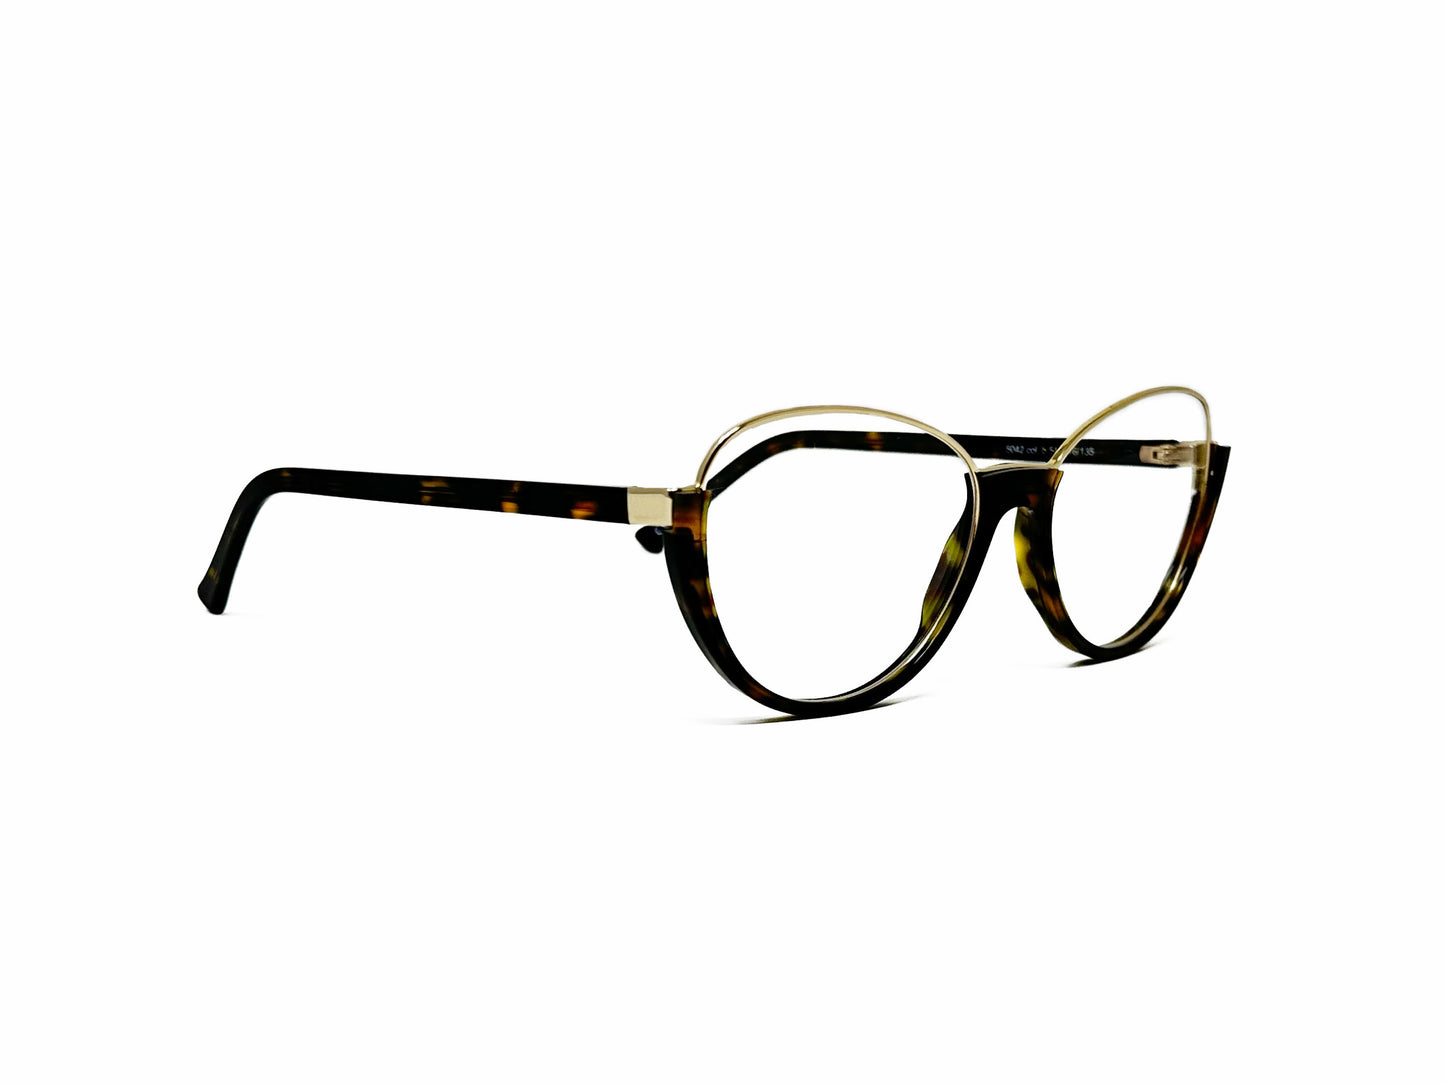 Andy Wolfe half-rim, cat-eye optical frame with metal rim on top. Model: 5042. Color: B - Tortoise and gold metal. Side view.